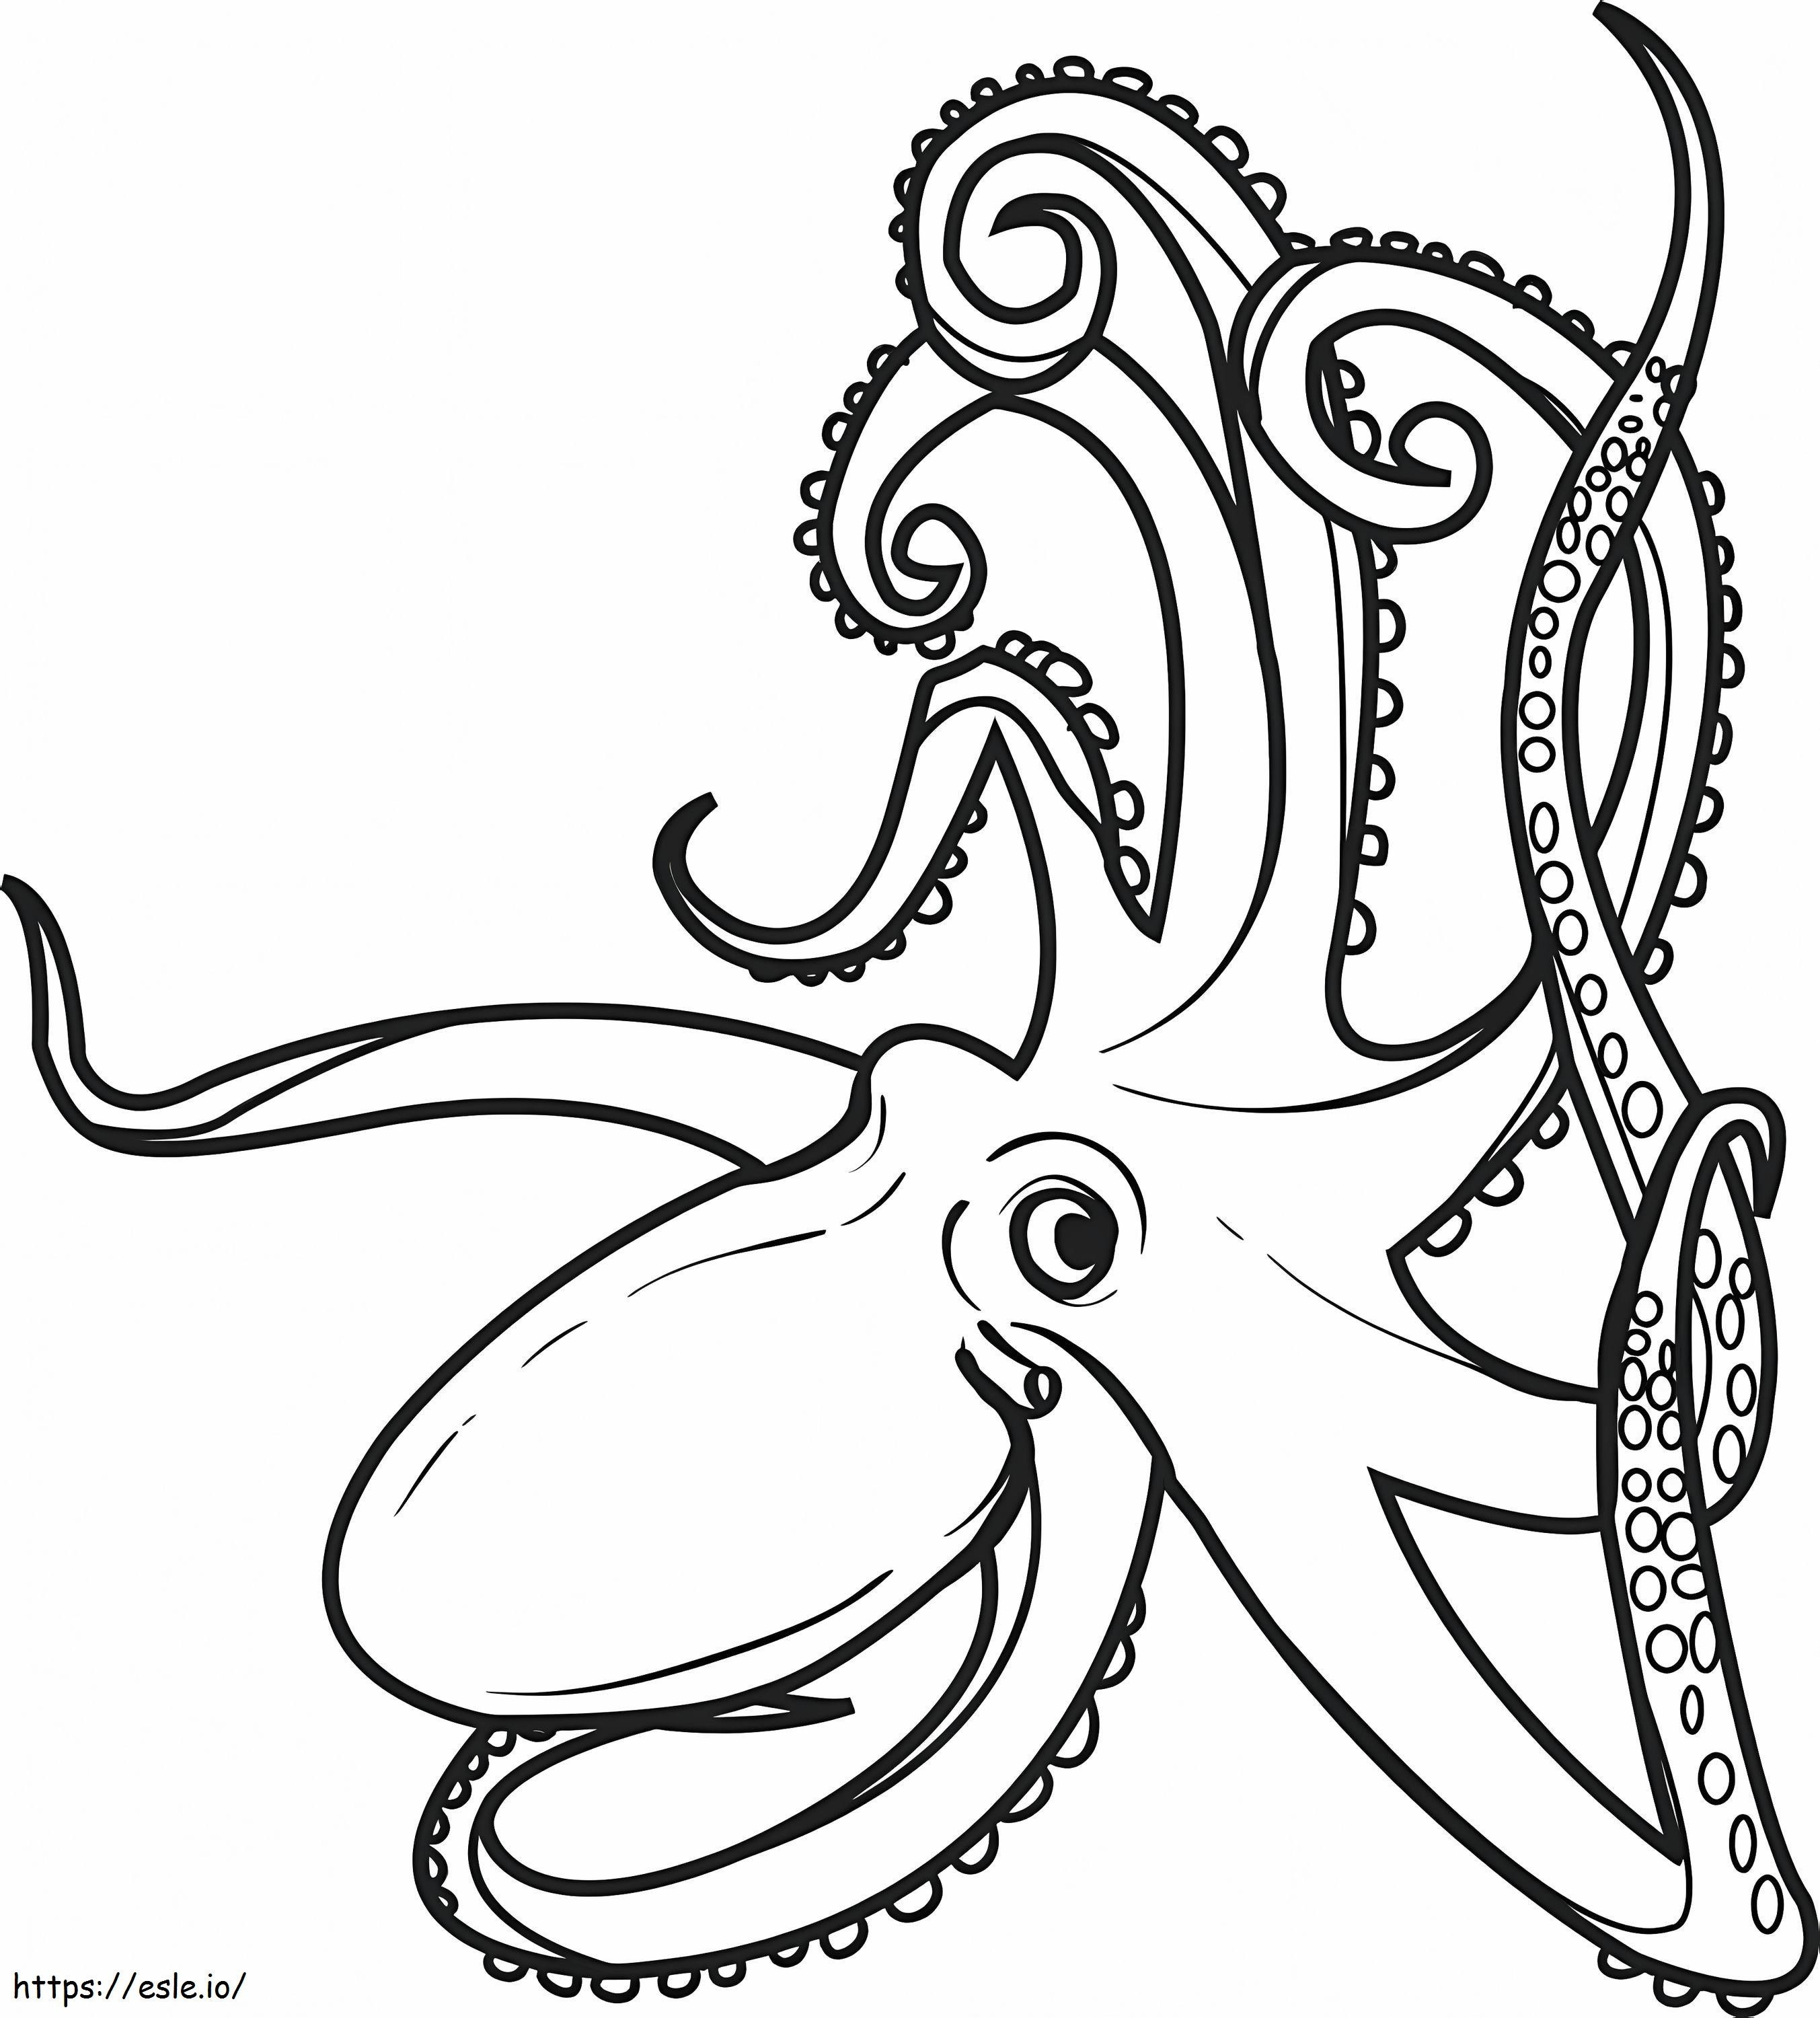 Awesome Octopus coloring page